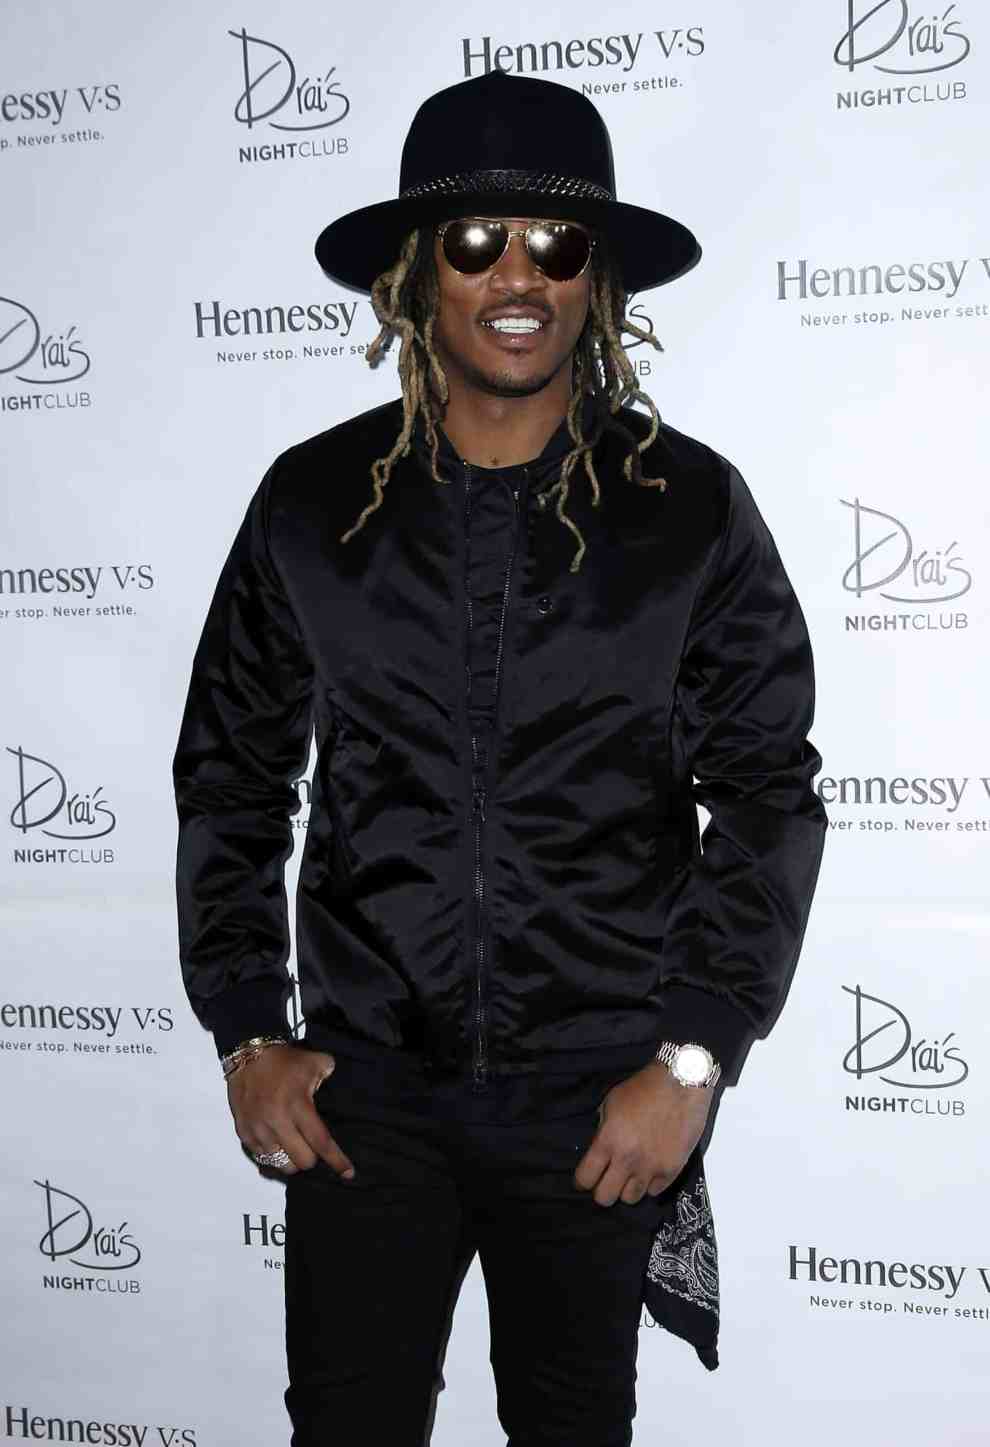 Future in front of background of Drai's Night Club and Hennessy V.S.